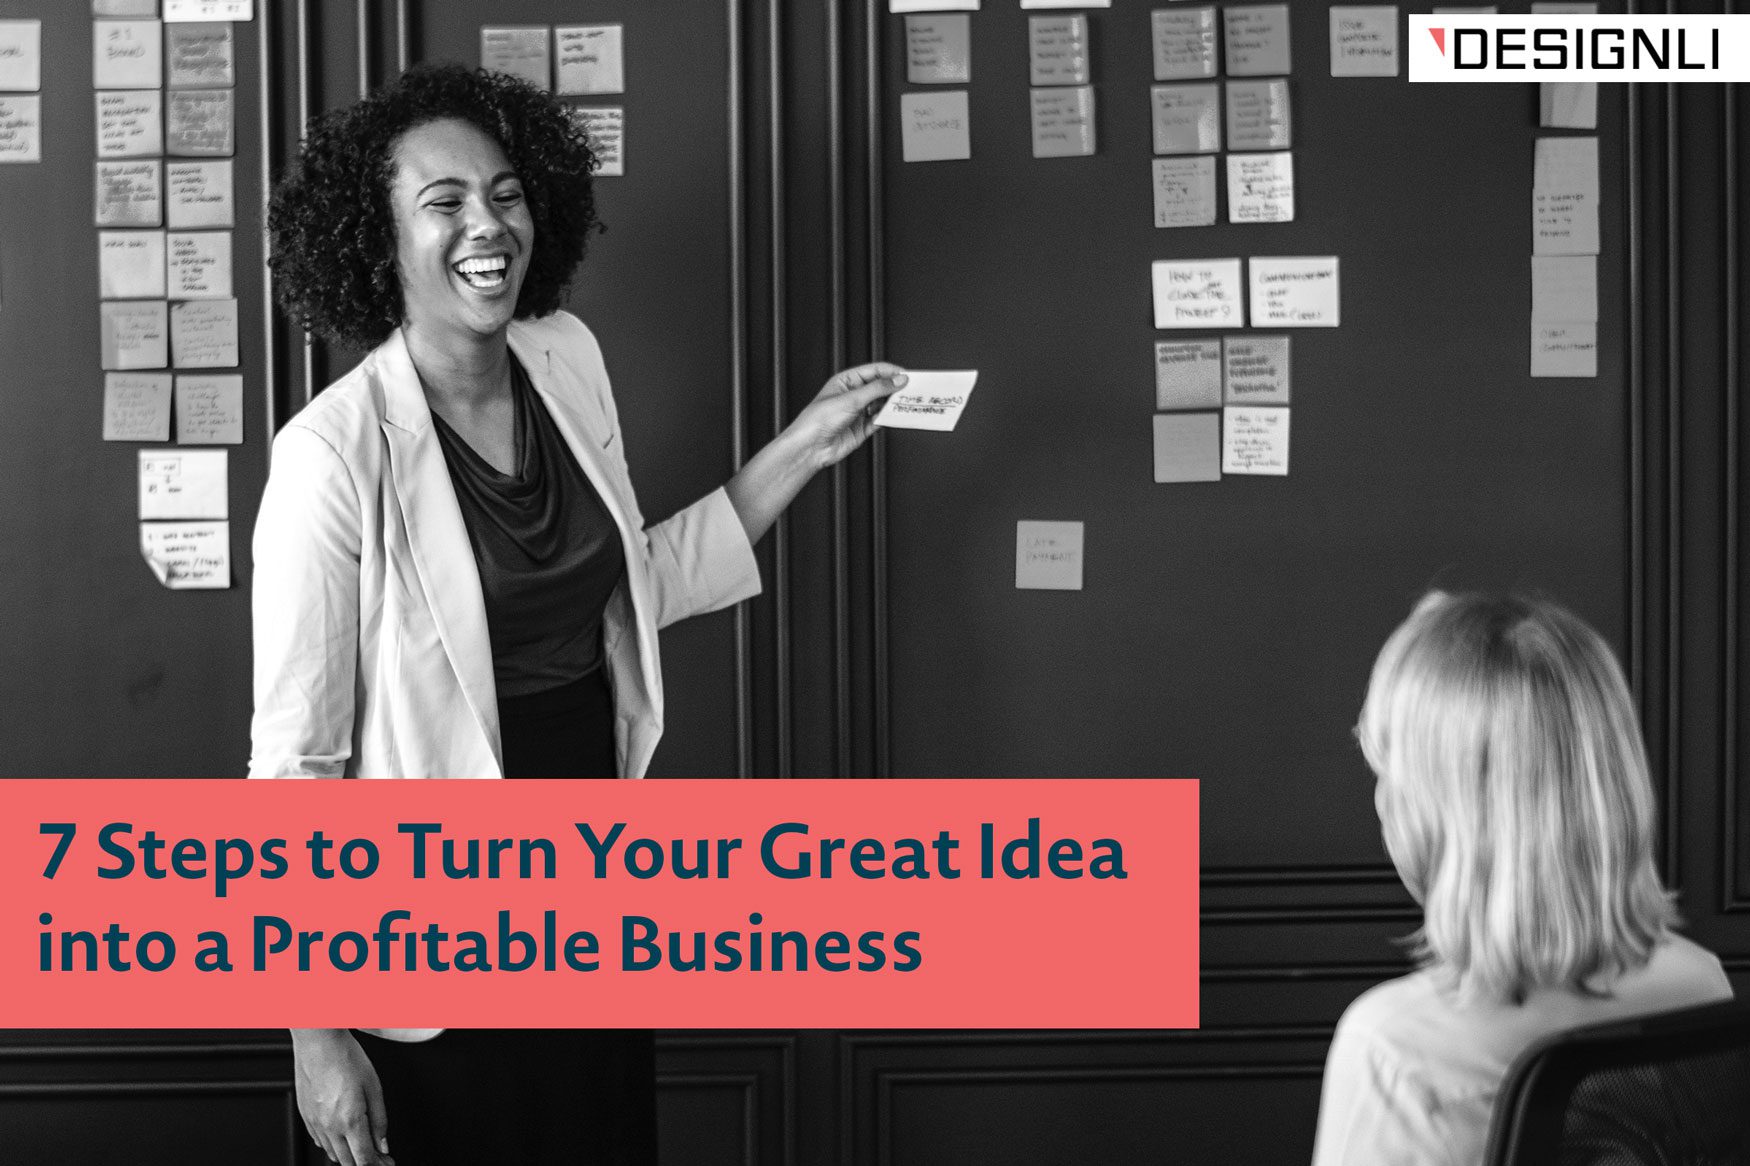 7 Steps to Turn Your Great Idea into a Profitable Business